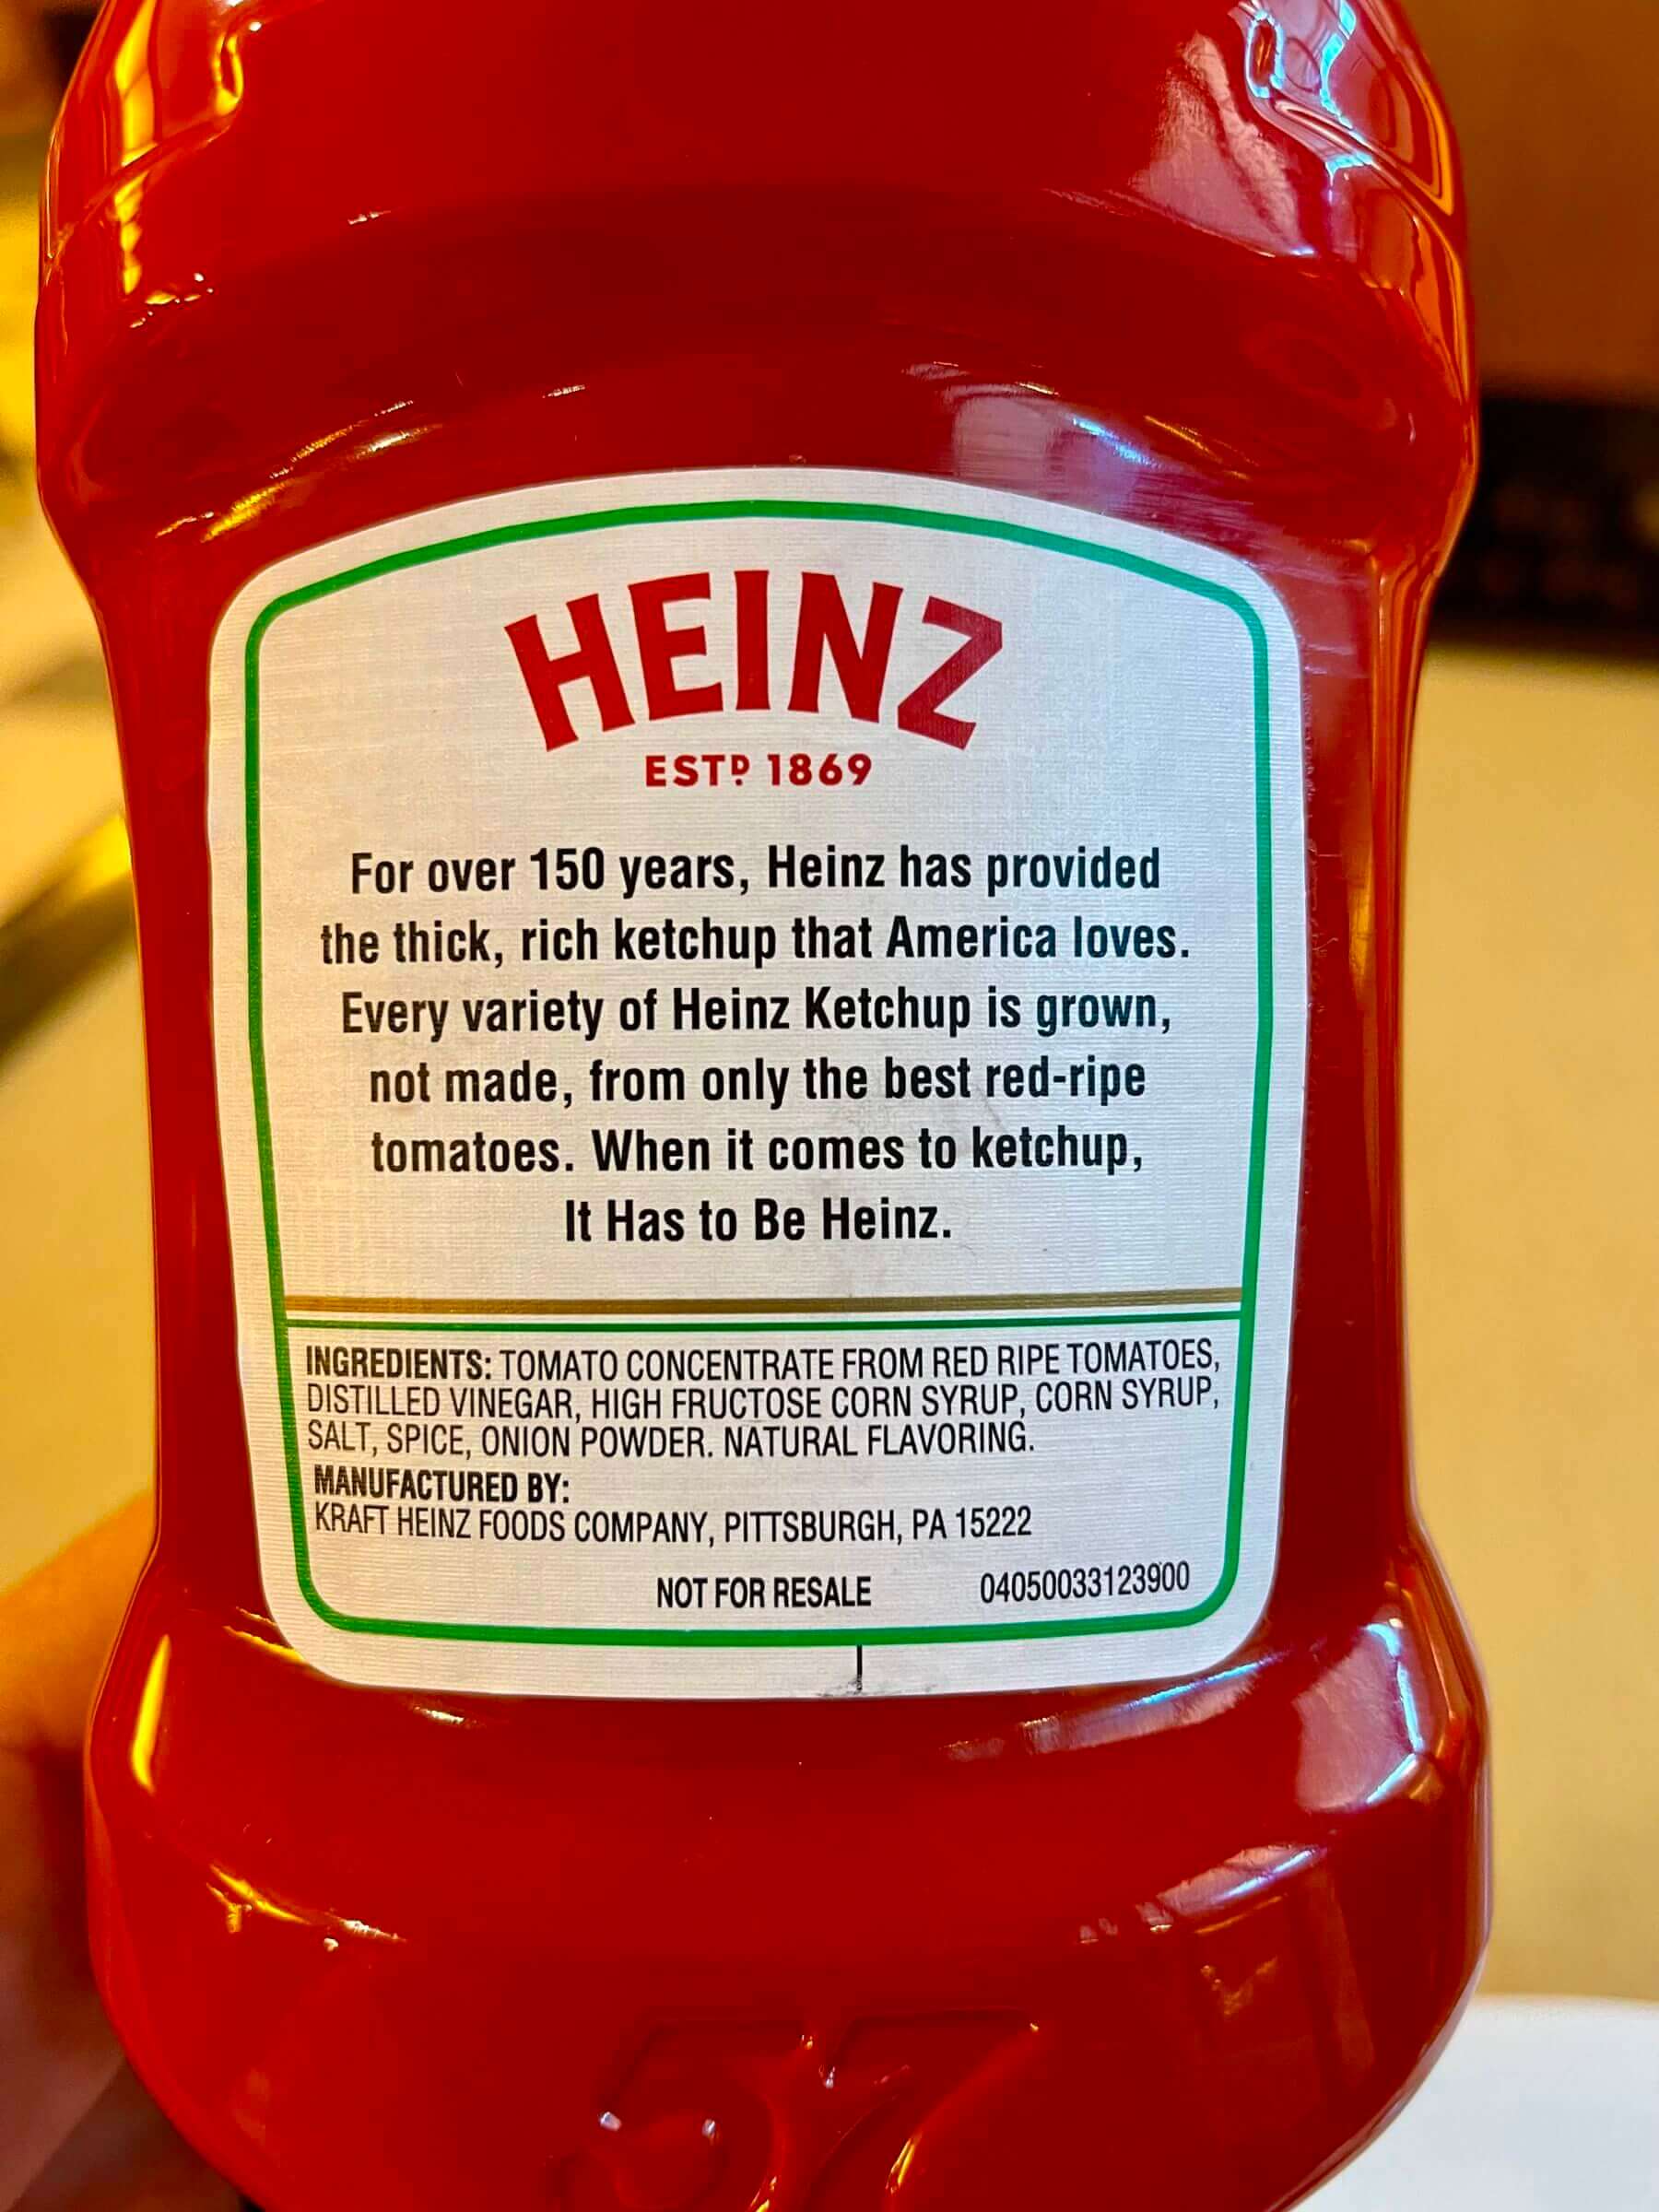 High-fructose corn syrup is found in many processed foods, including ketchup.